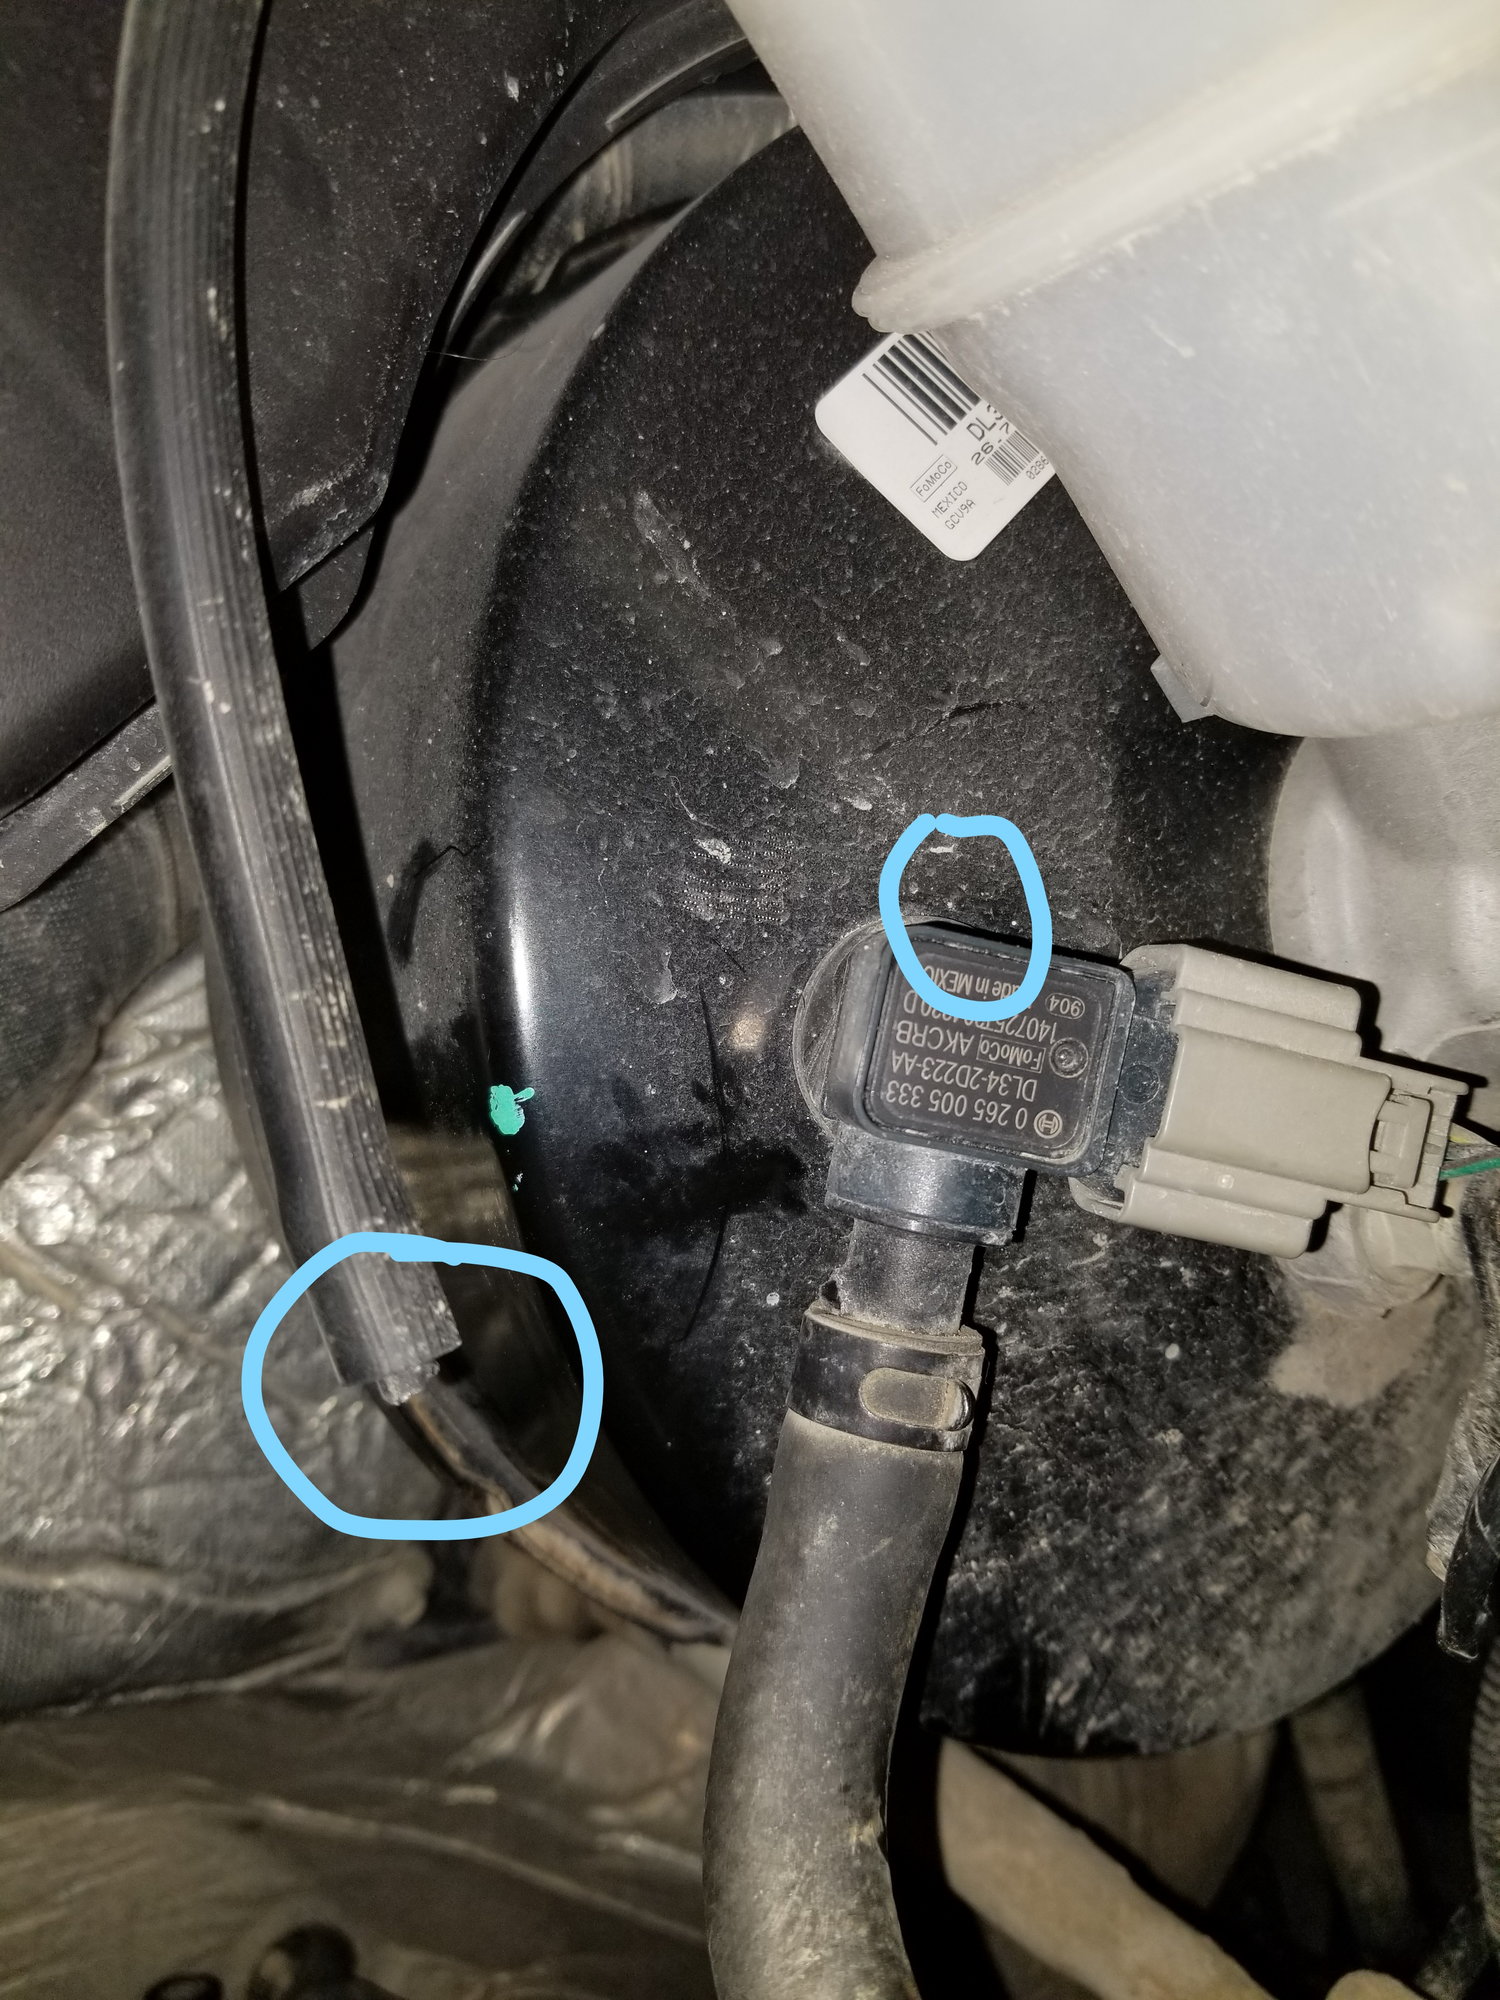 2014 F150 stuttering on acceleration - Ford F150 Forum - Community of 2014 F150 Check Engine Light Flashing When Accelerating